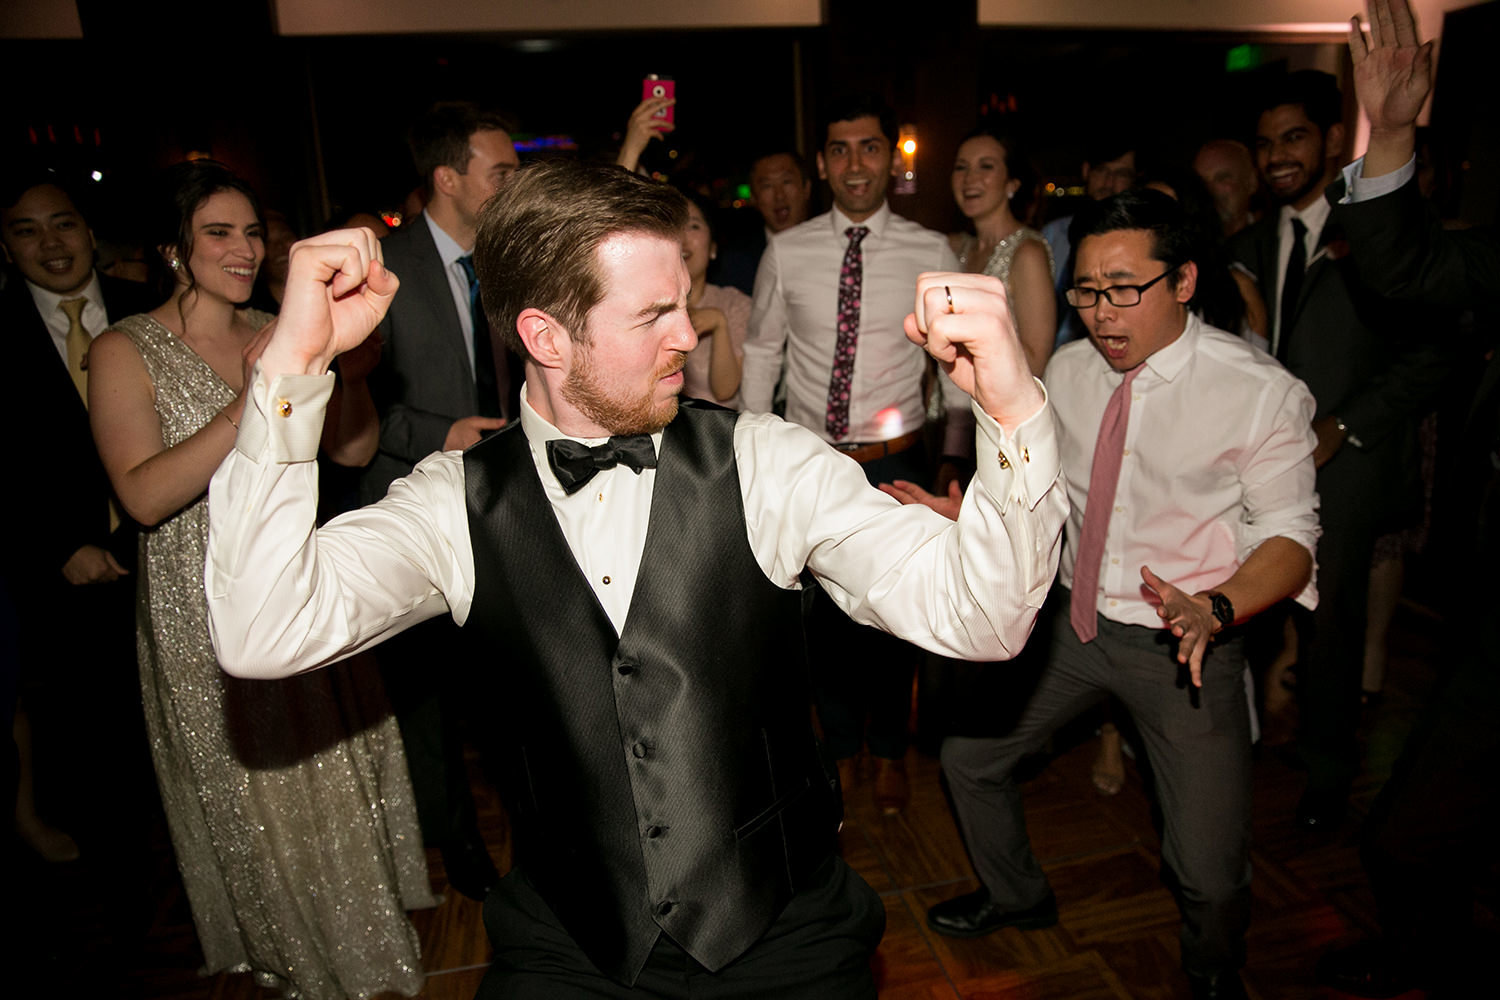 groom dancing at reception being silly